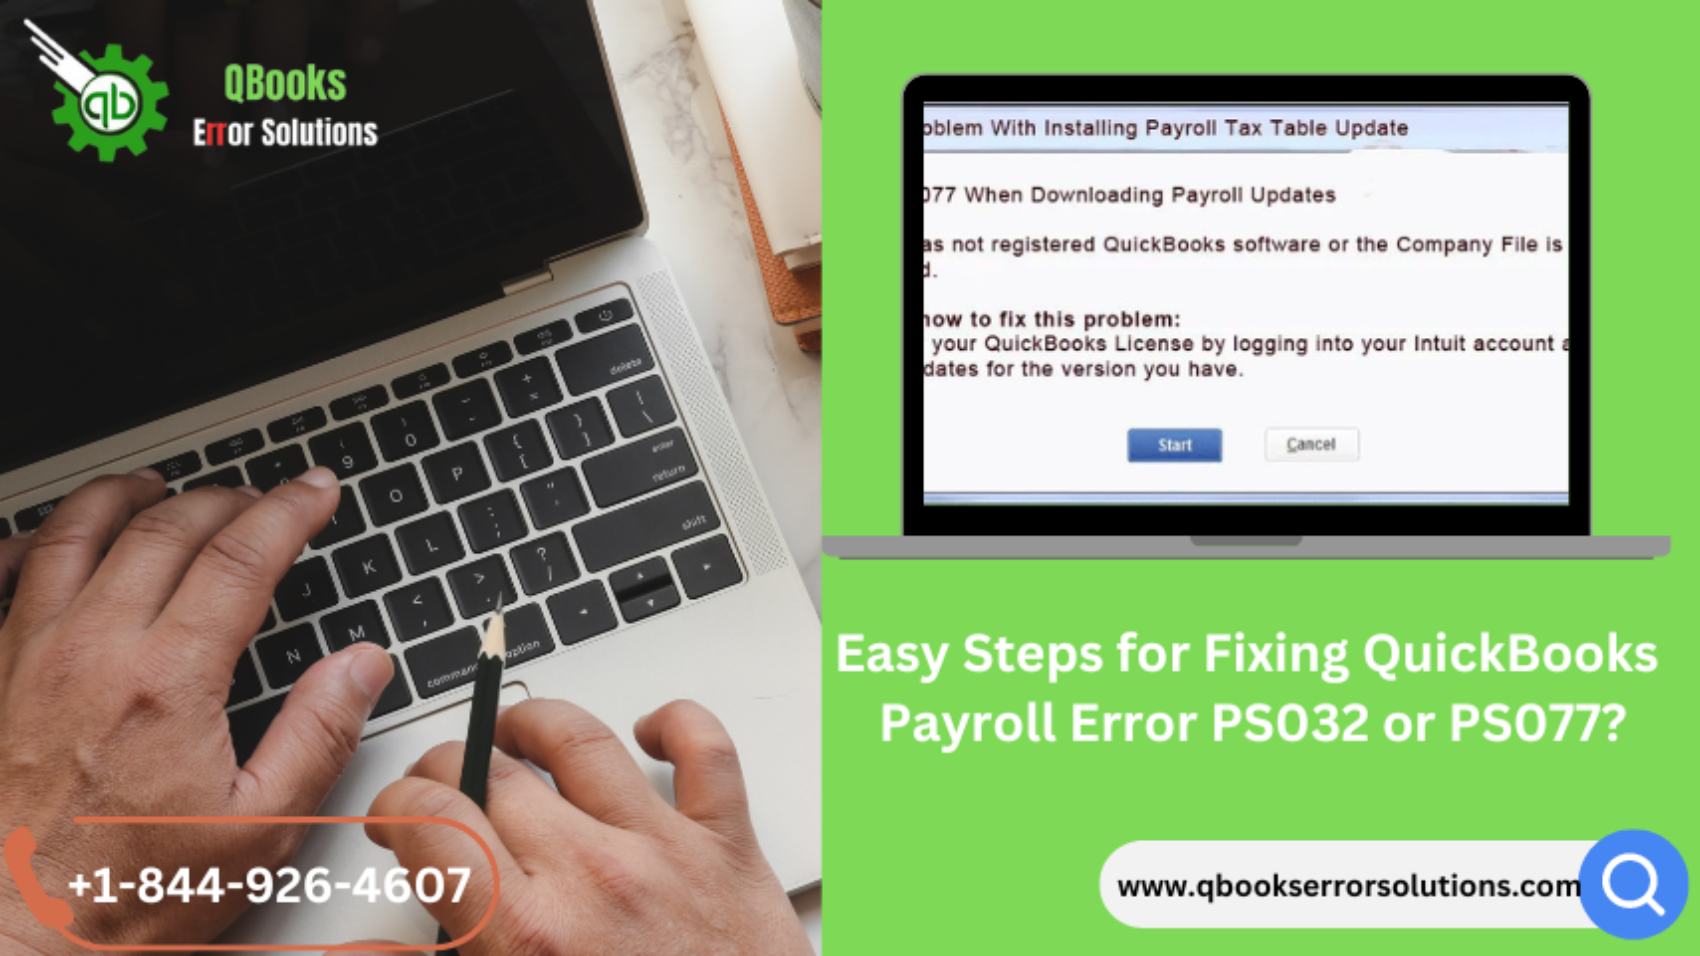 How to Rectify QuickBooks Payroll Error PS032 or PS077